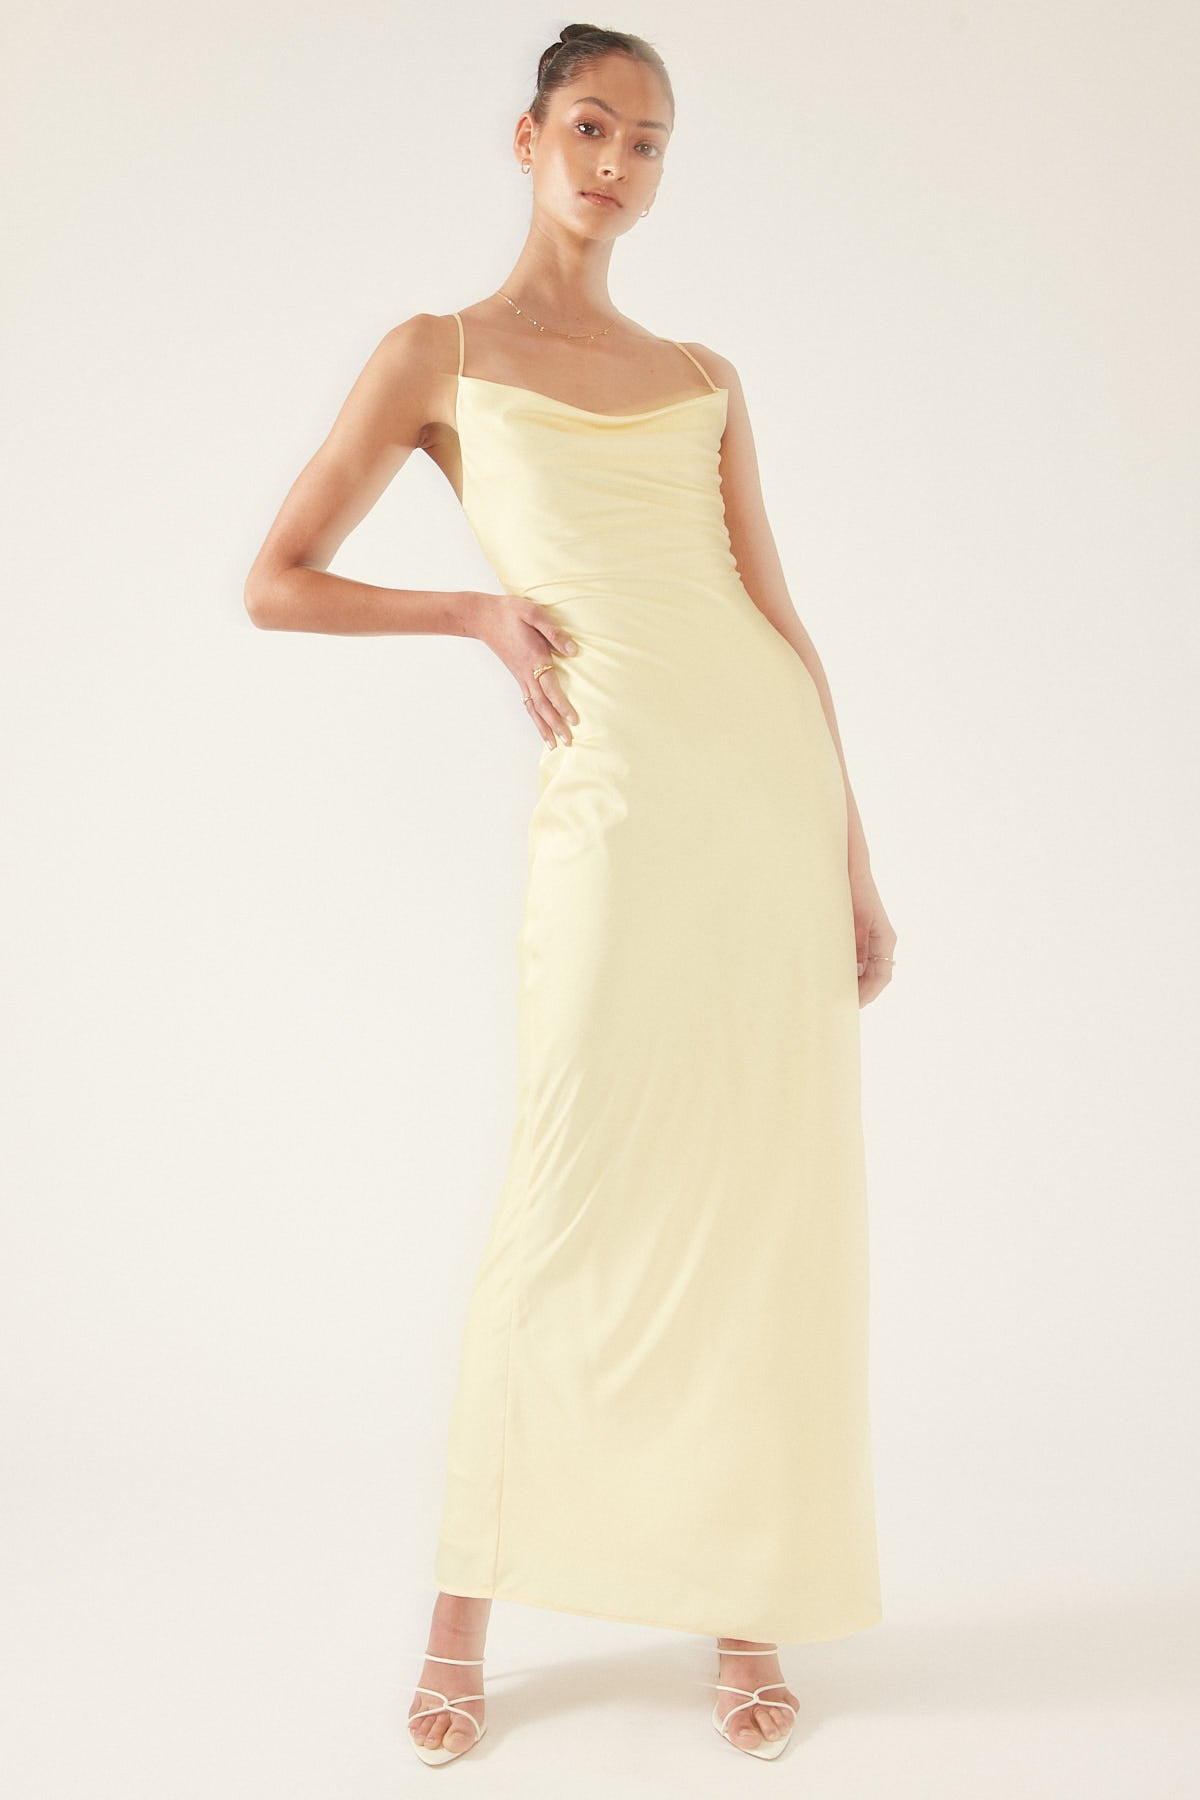 Perfect Stranger Evie Recycled Maxi Dress Yellow